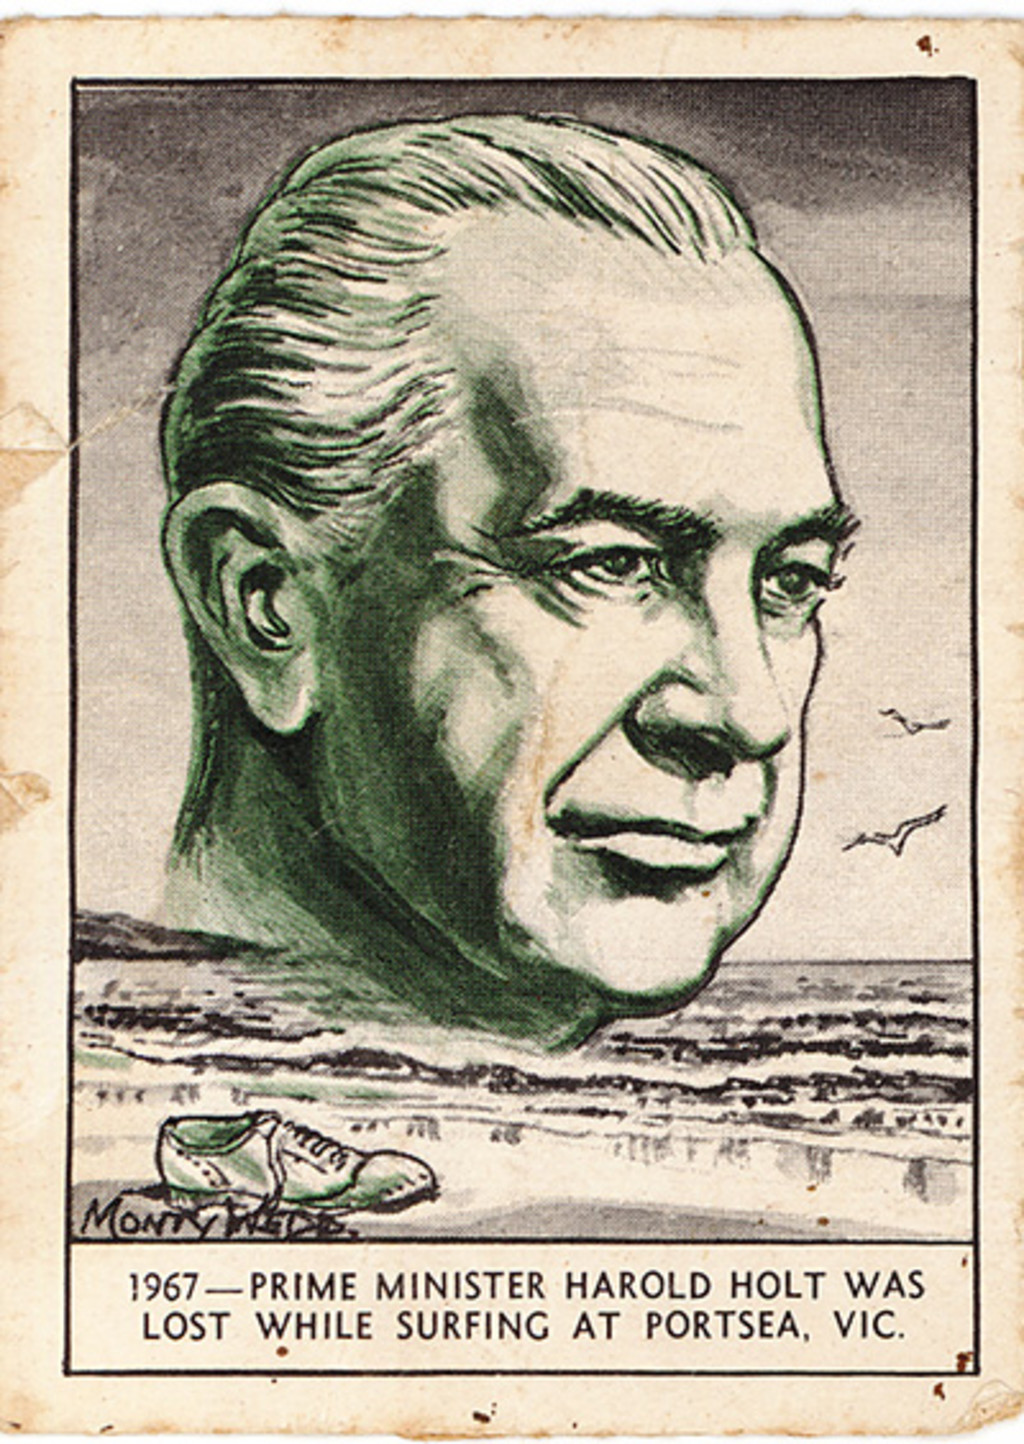 The legacy of Harold Holt 50 years